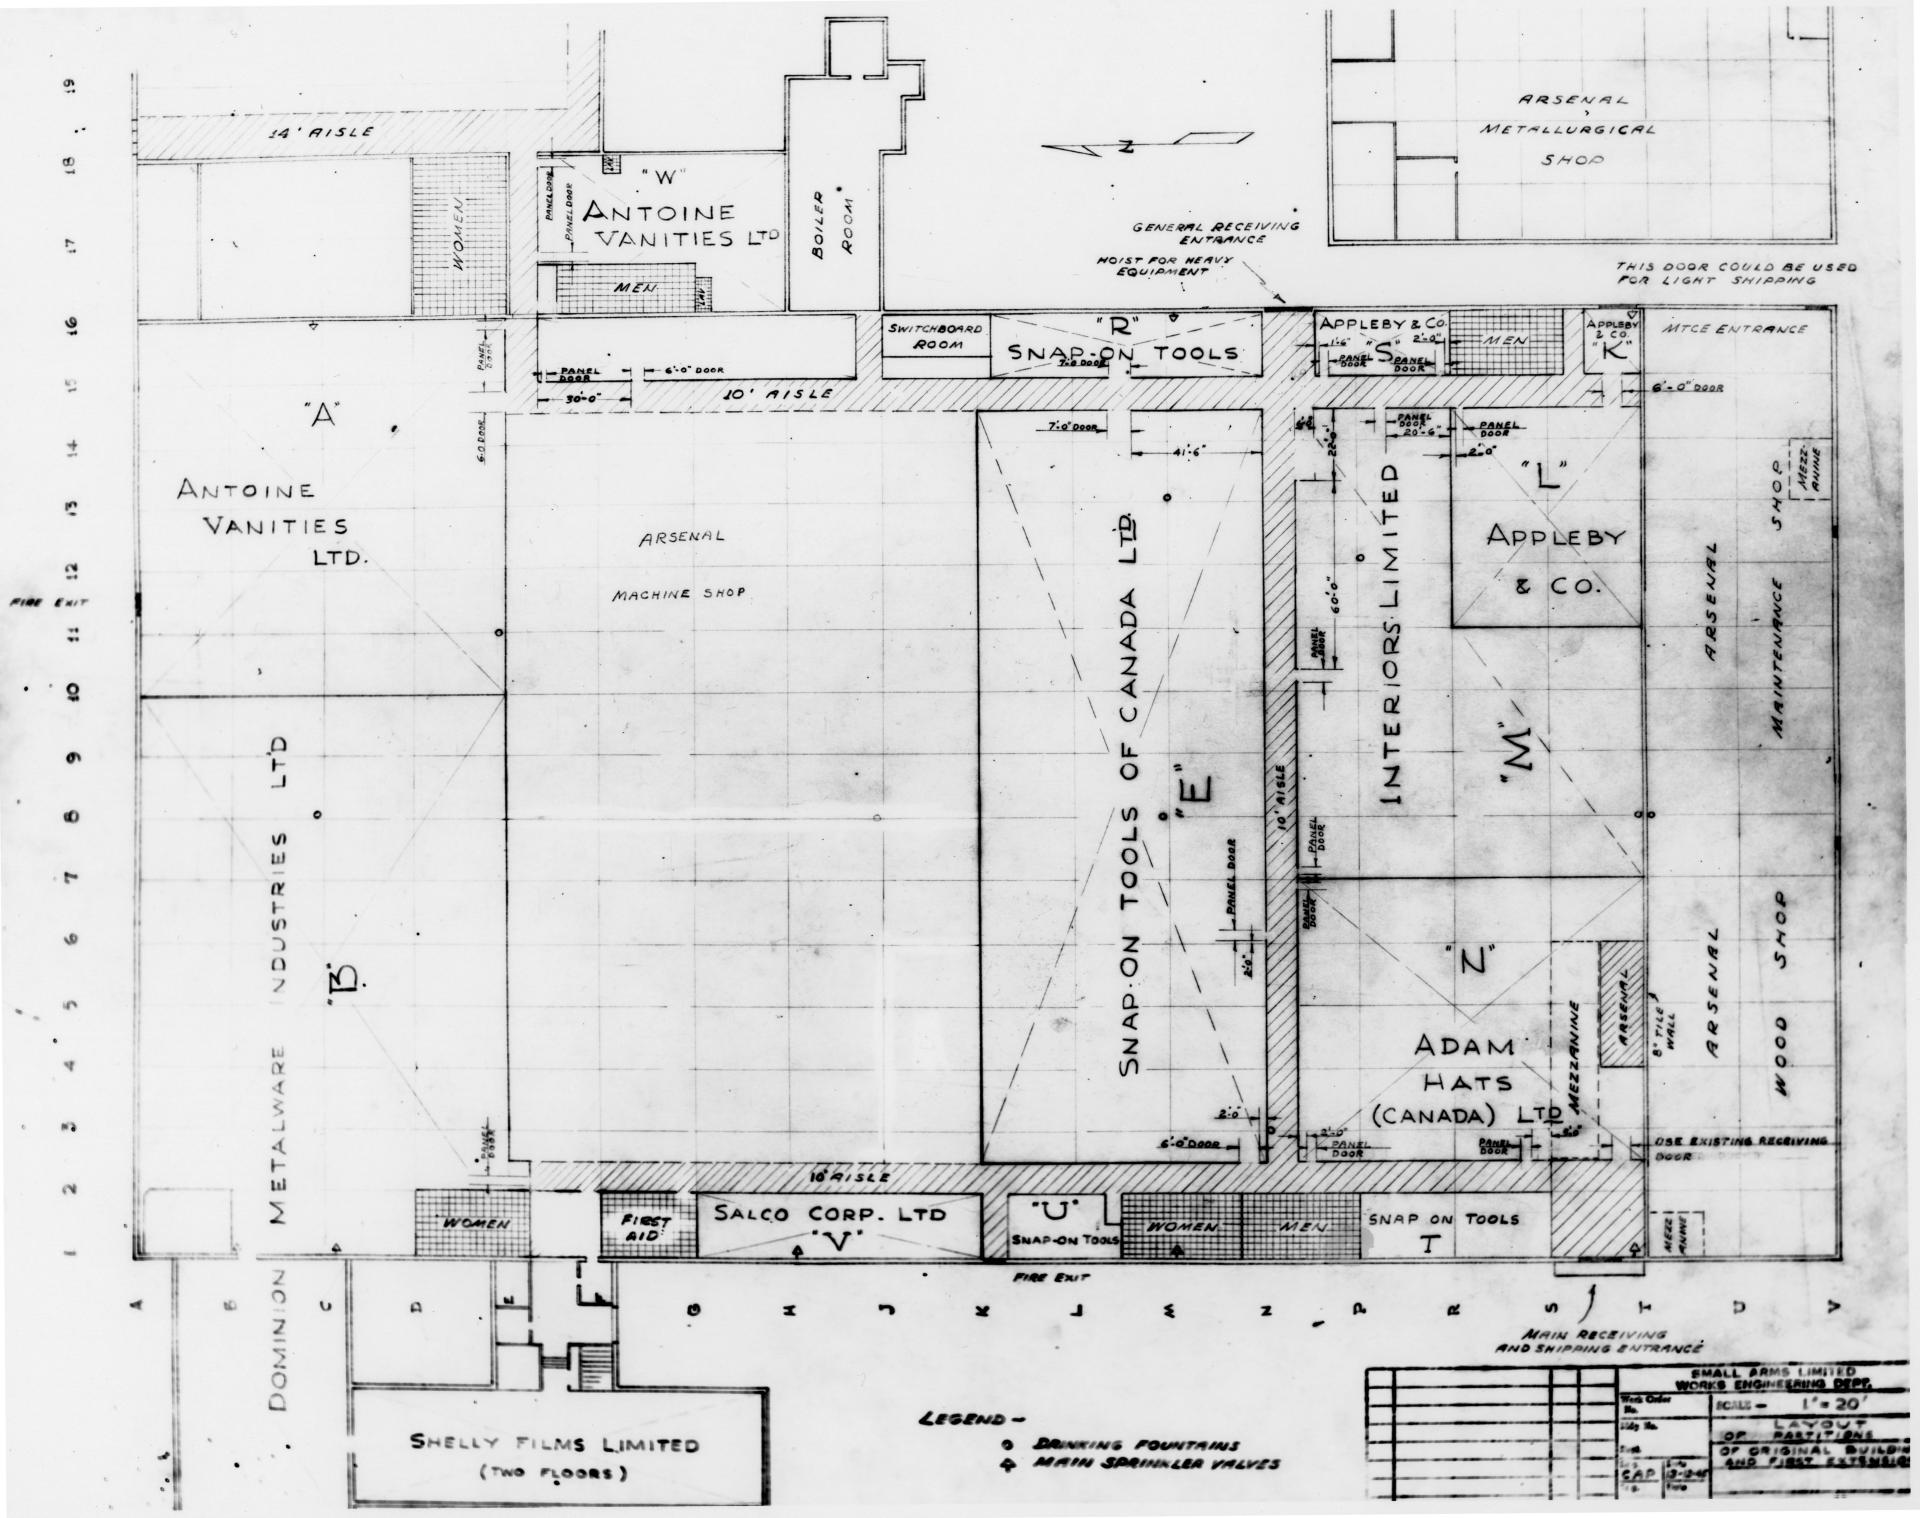 Engineering department drawing of the space allocated for new tenants in the Small Arms Limited plant.